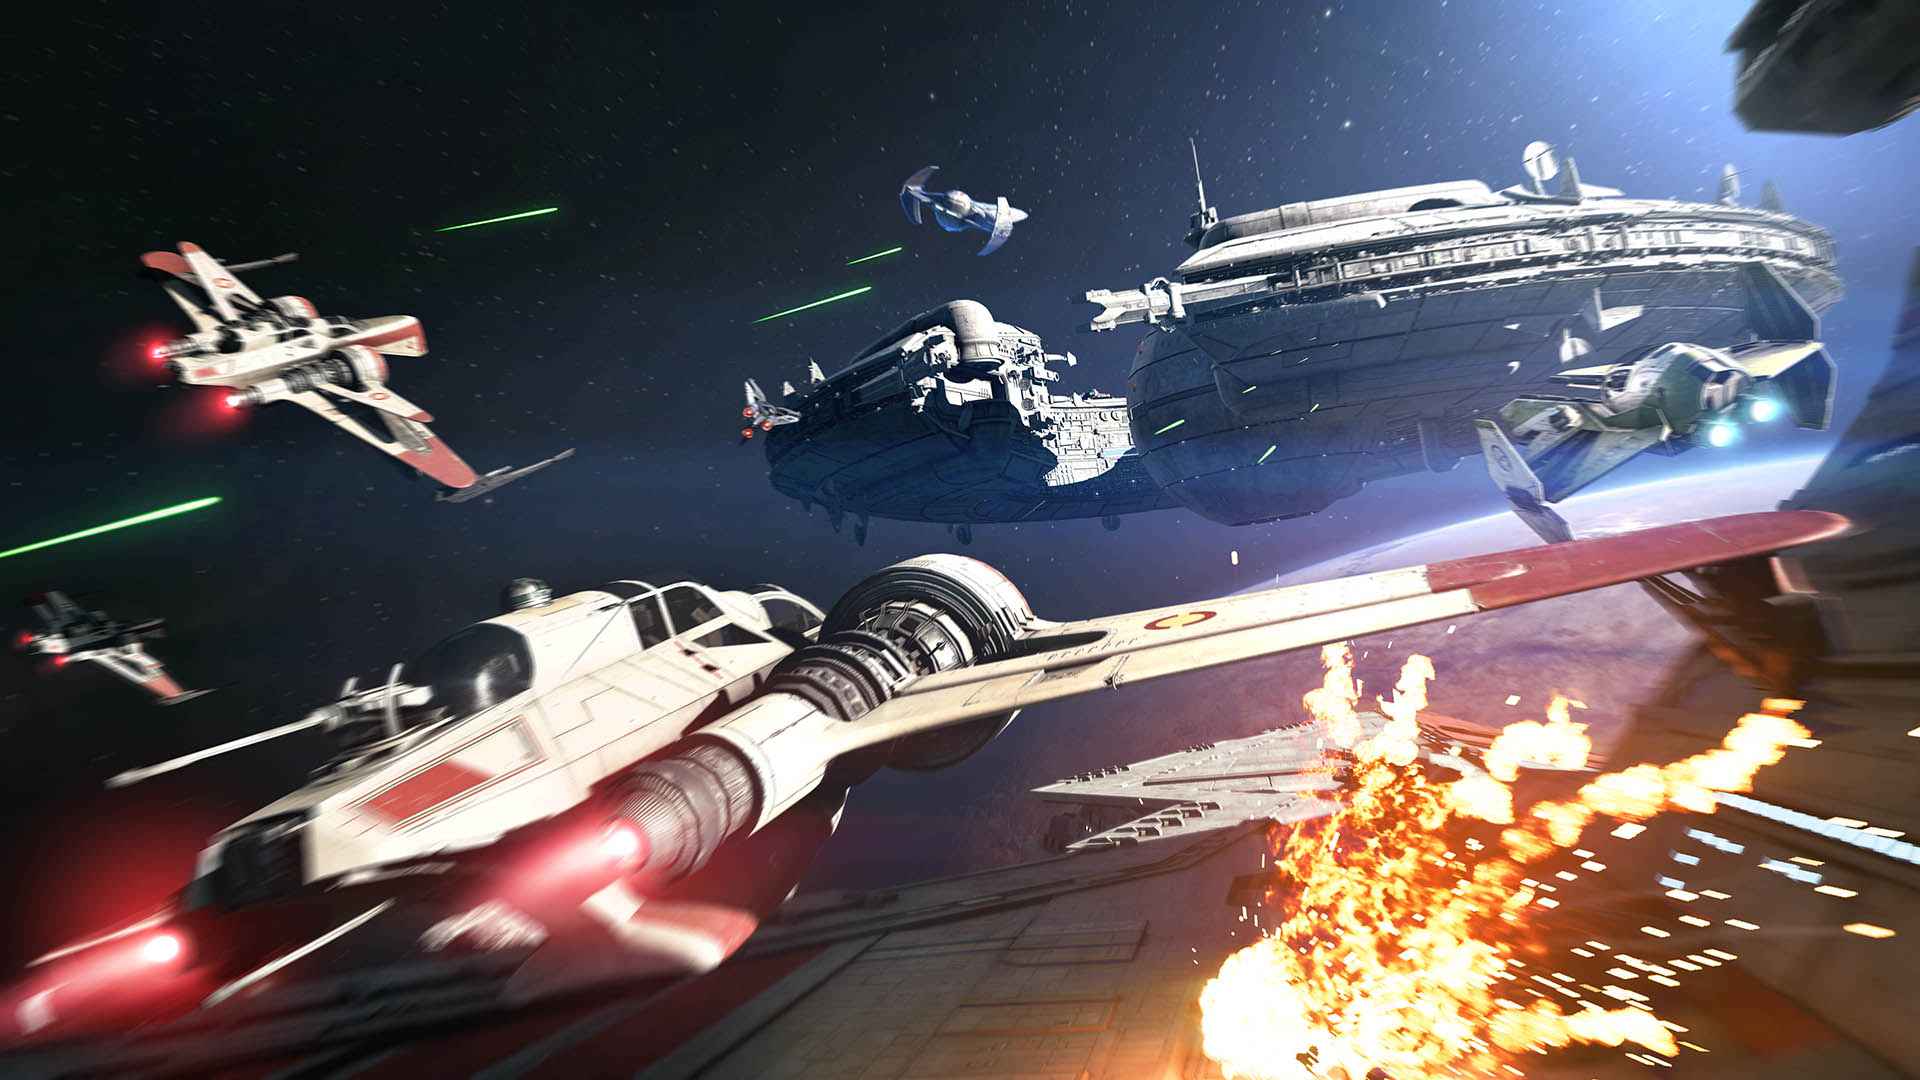 Ea And Star Wars Partnership Has Been Bad For Everyone